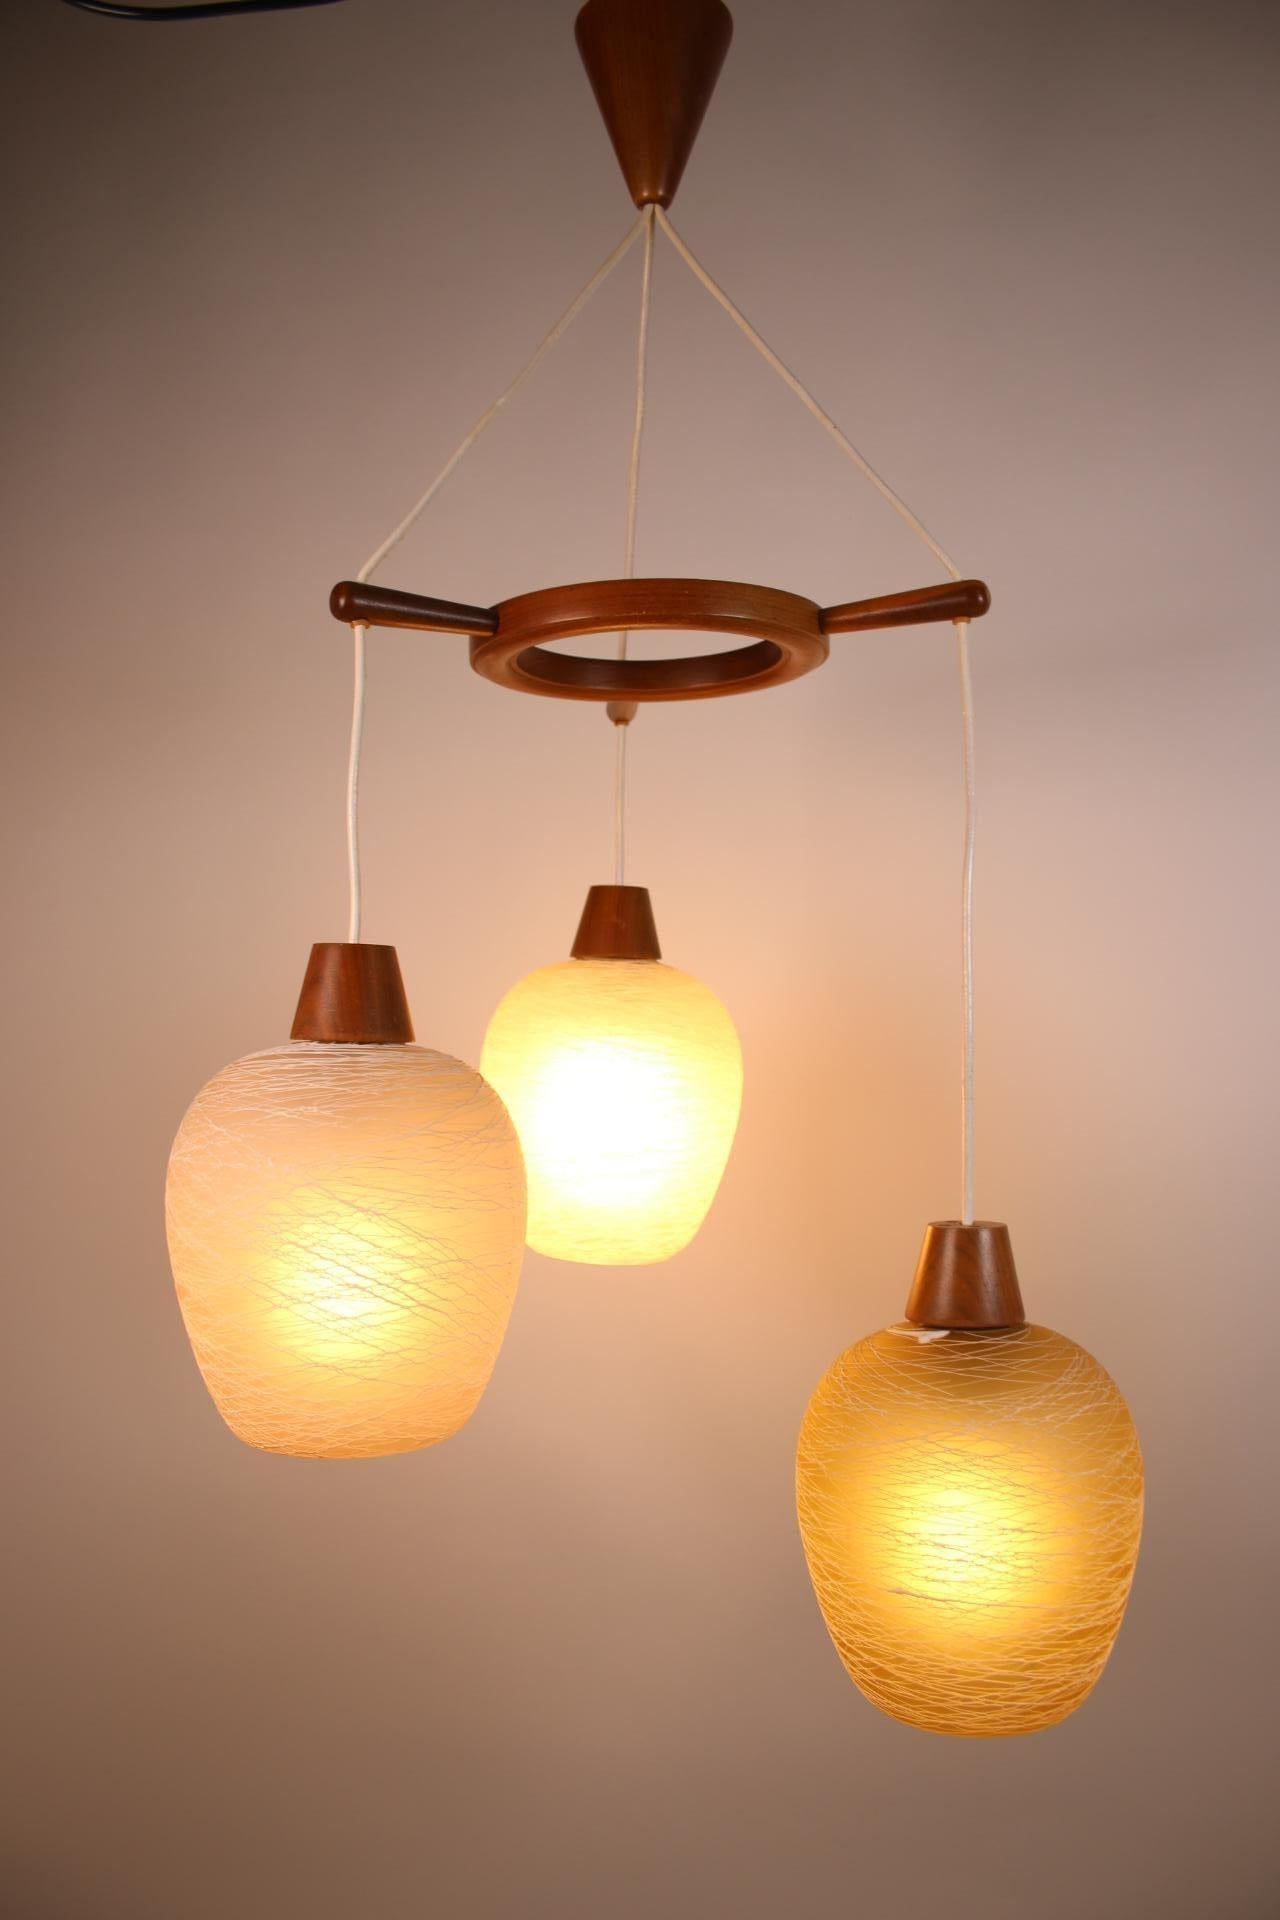 Vintage hanging lamp with 3 colored glass balls, 1960 Denmark


A beautiful, cool and special Scandinavian hanging lamp with Teak wood.

The glass shades have 3 different colors. They have the color white, orange/brown and pink. These are covered